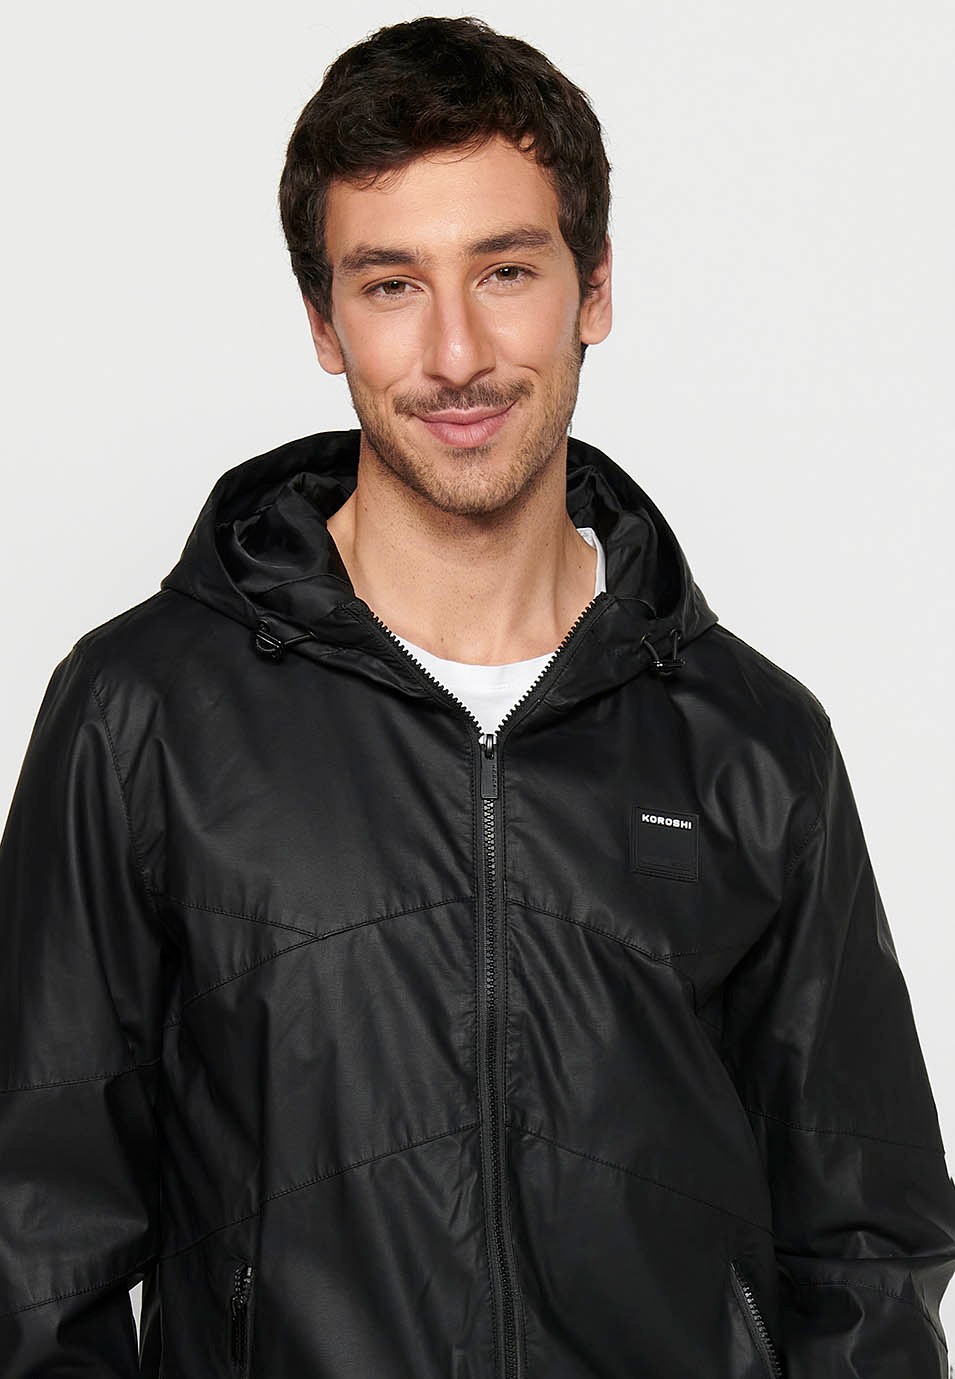 Leather-effect jacket with front zipper closure and hooded collar in black for Men 3